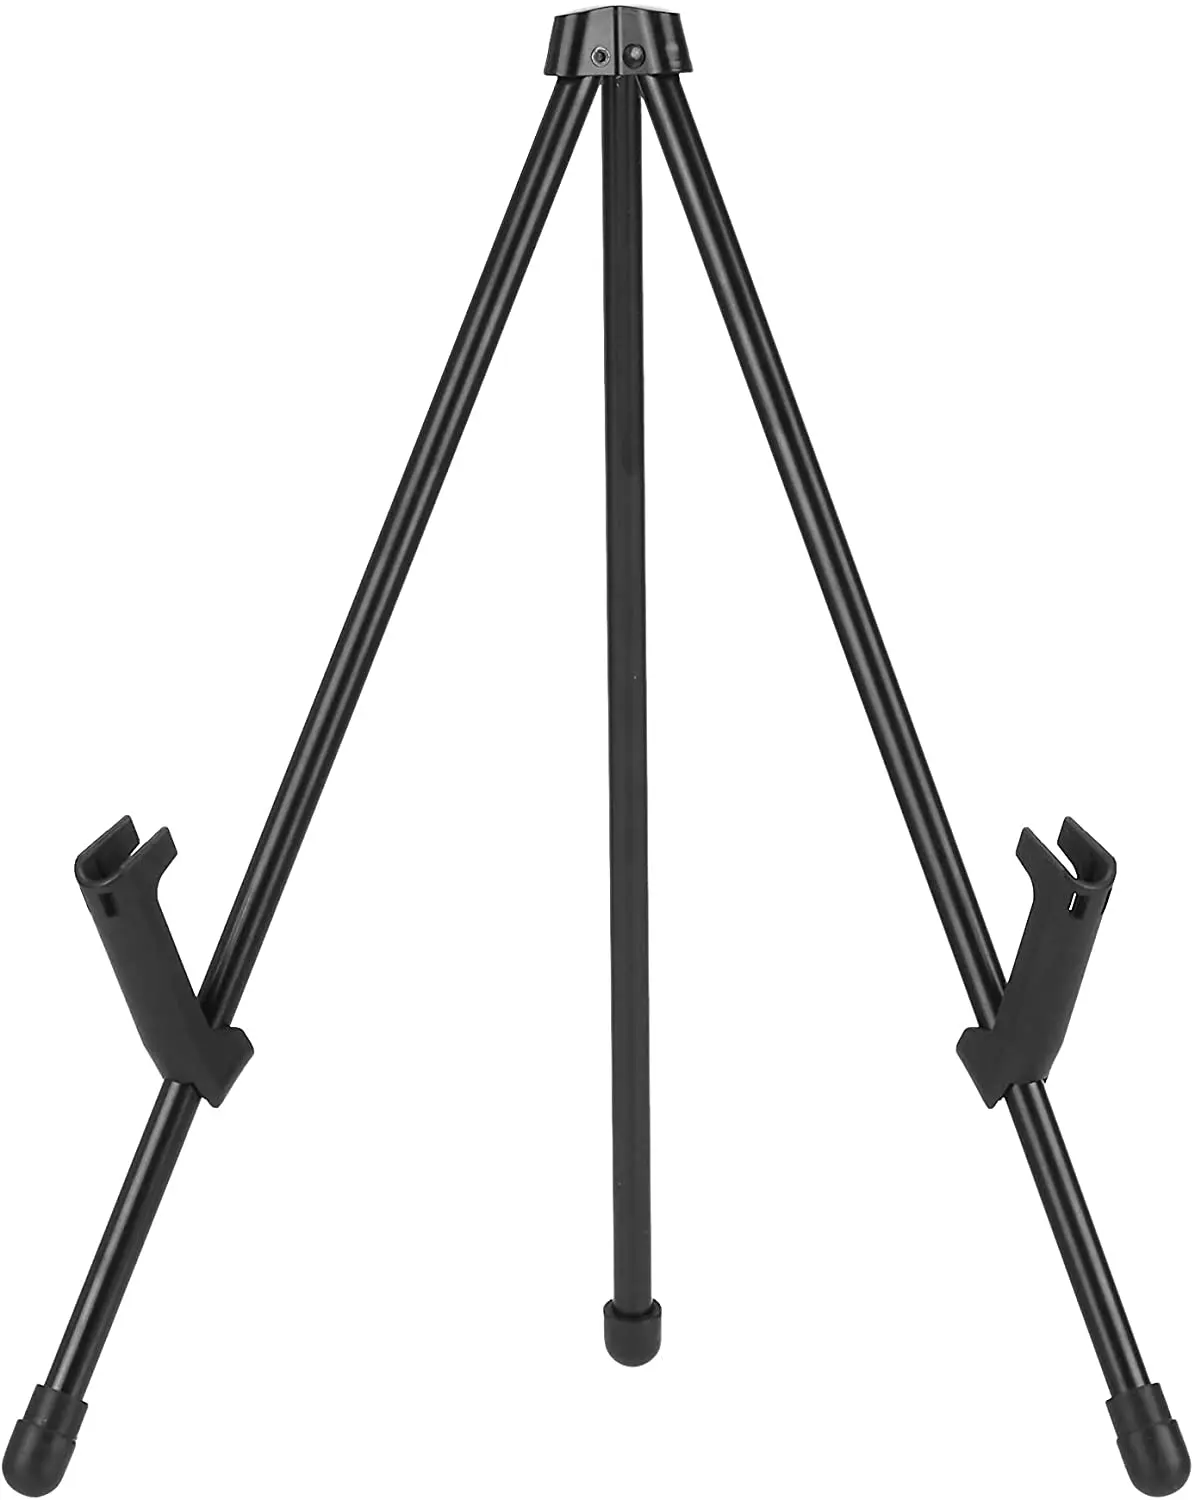 Tabletop Instant Easel – Tripé, Supports 5 lbs